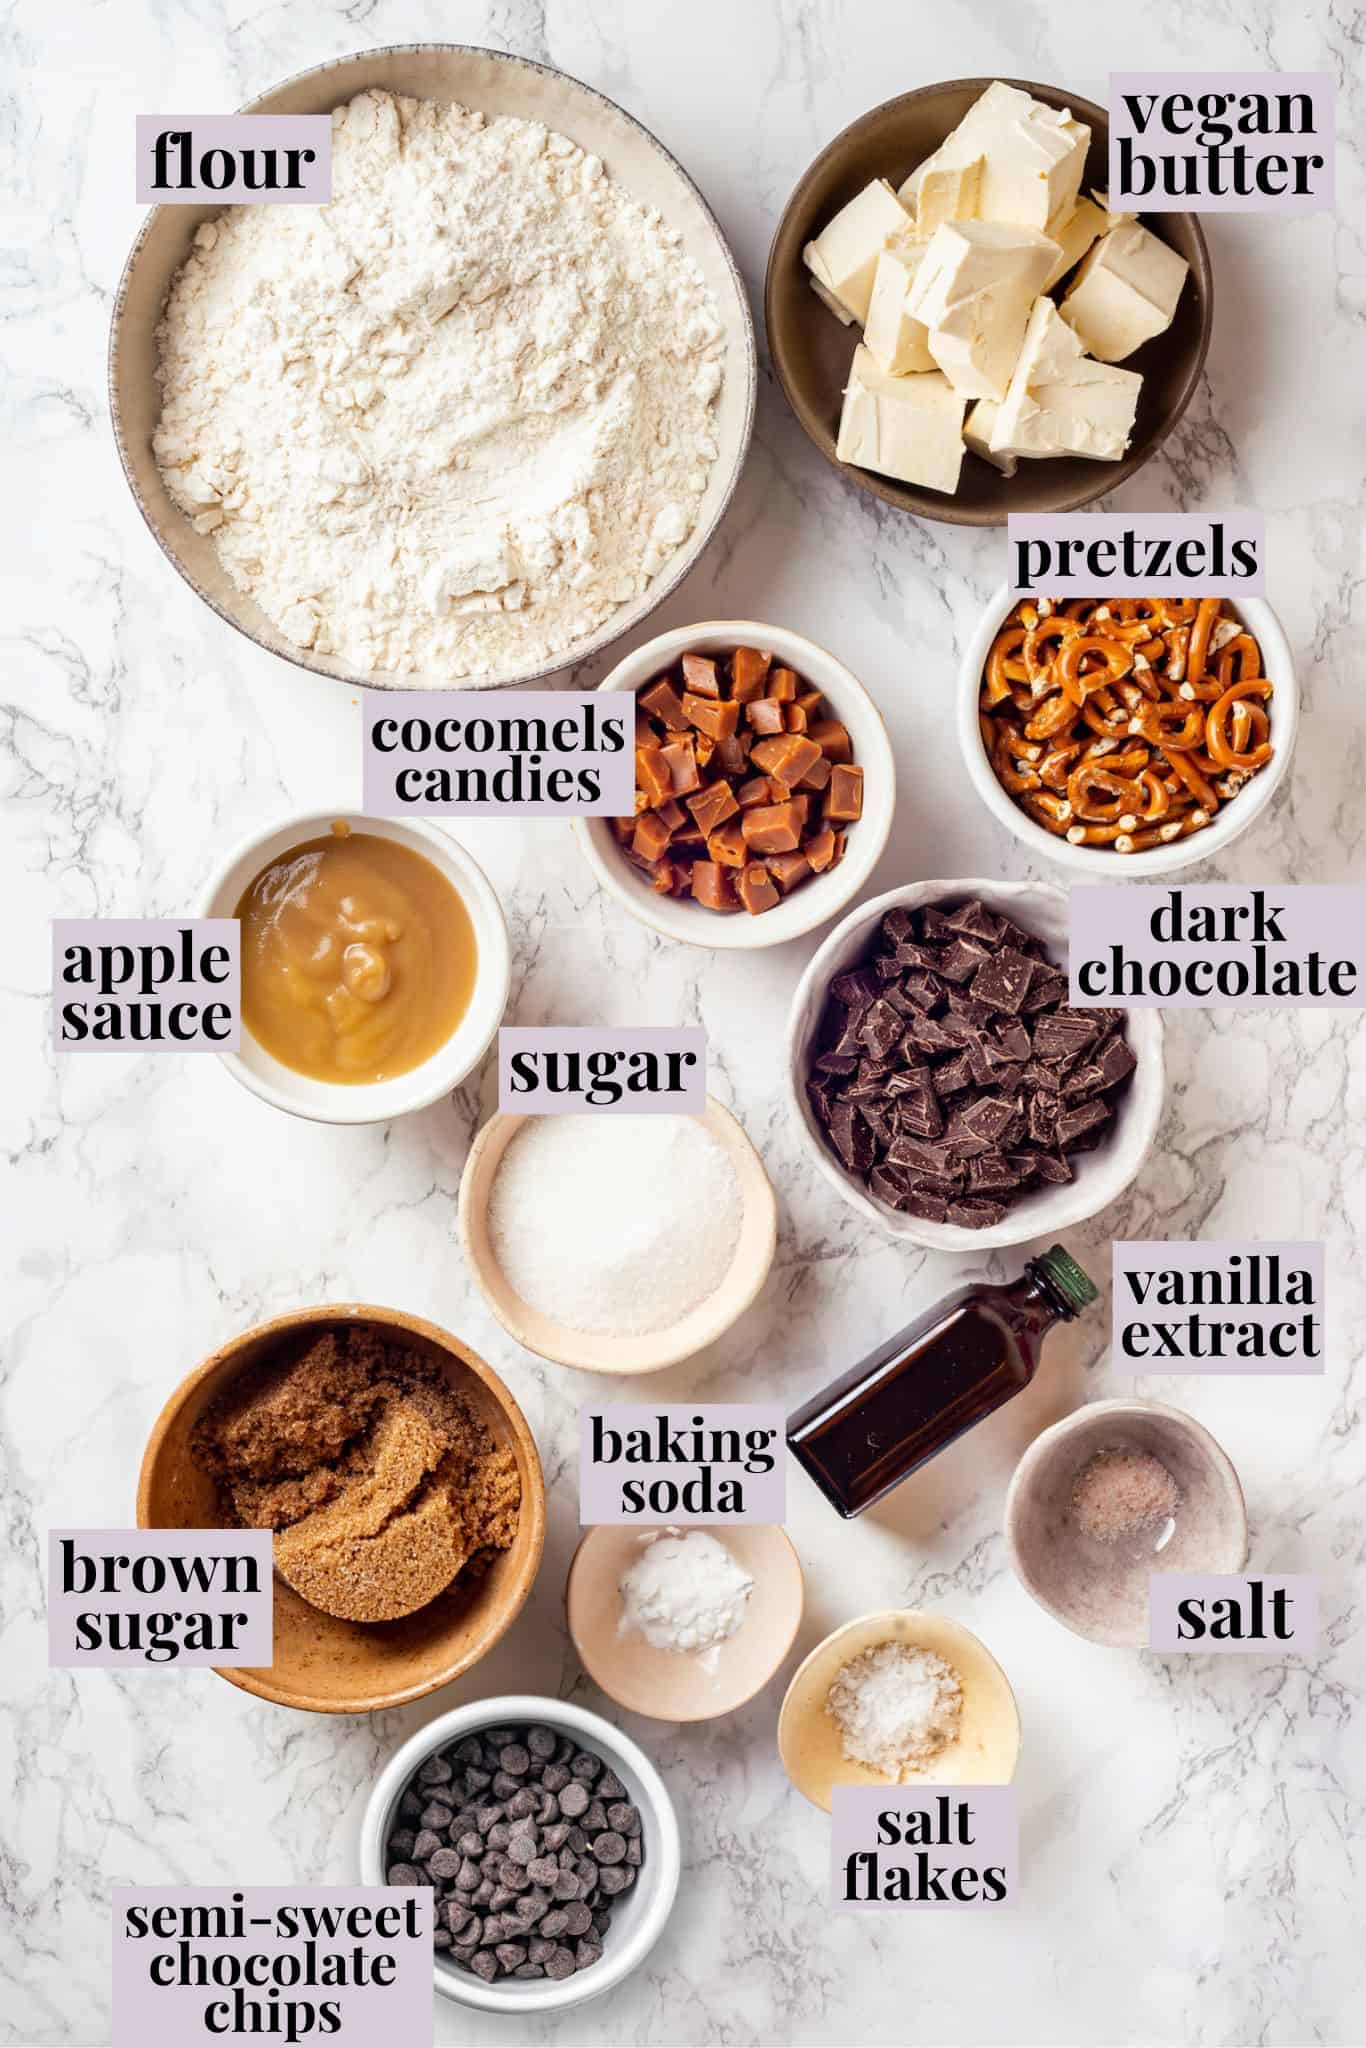 Overhead view of ingredients for kitchen sink cookies with labels